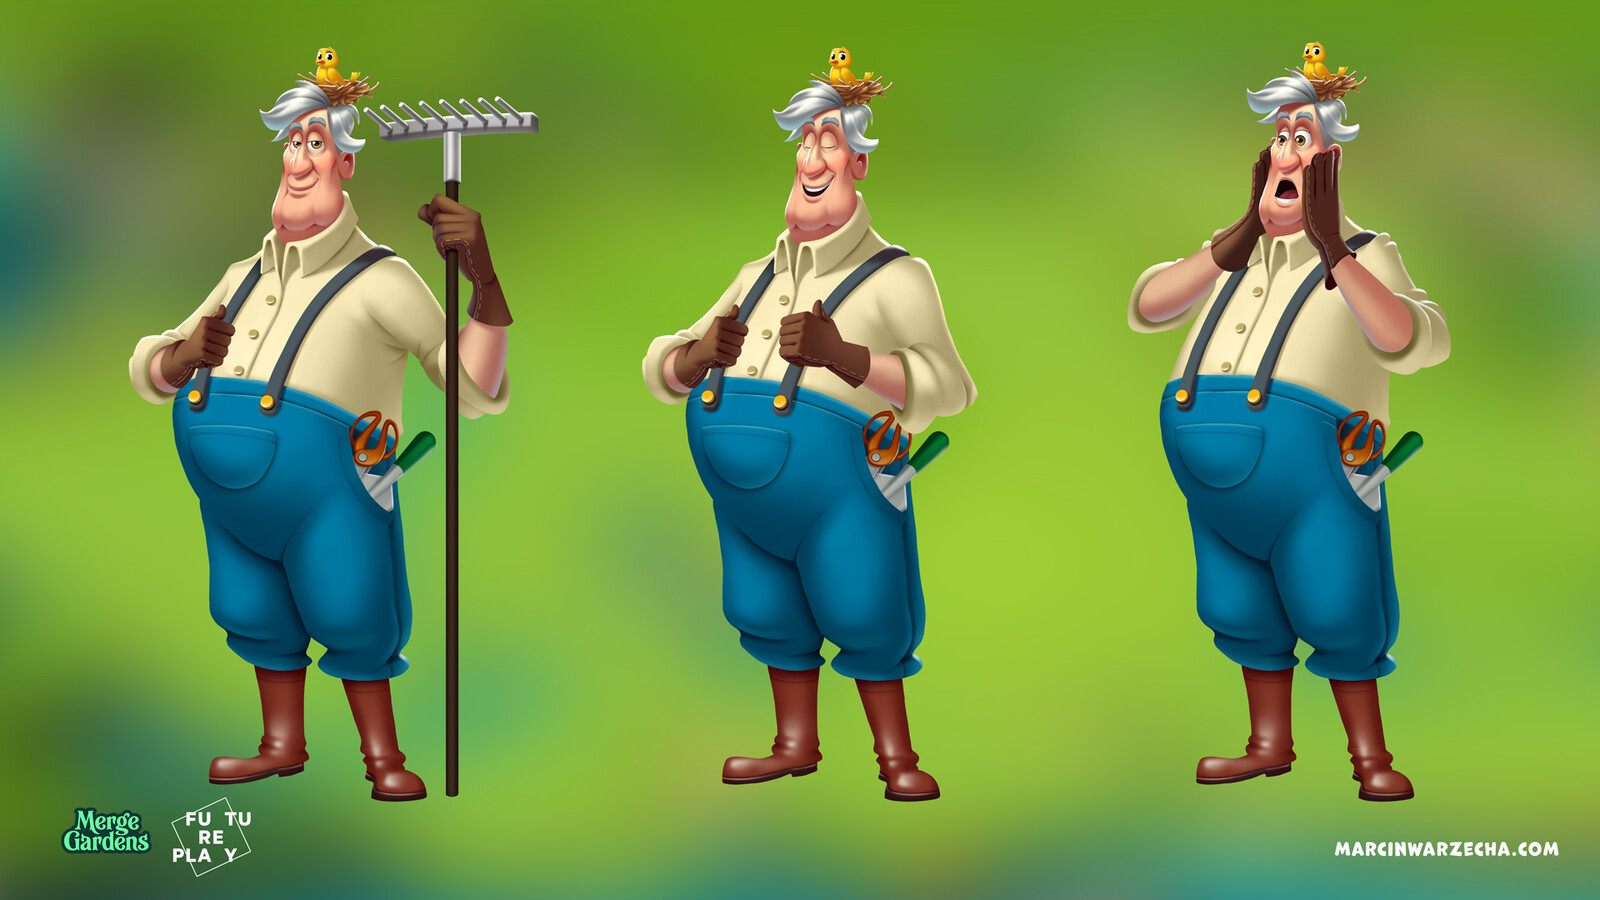 Richard - Casual stylized character design for mobile game 